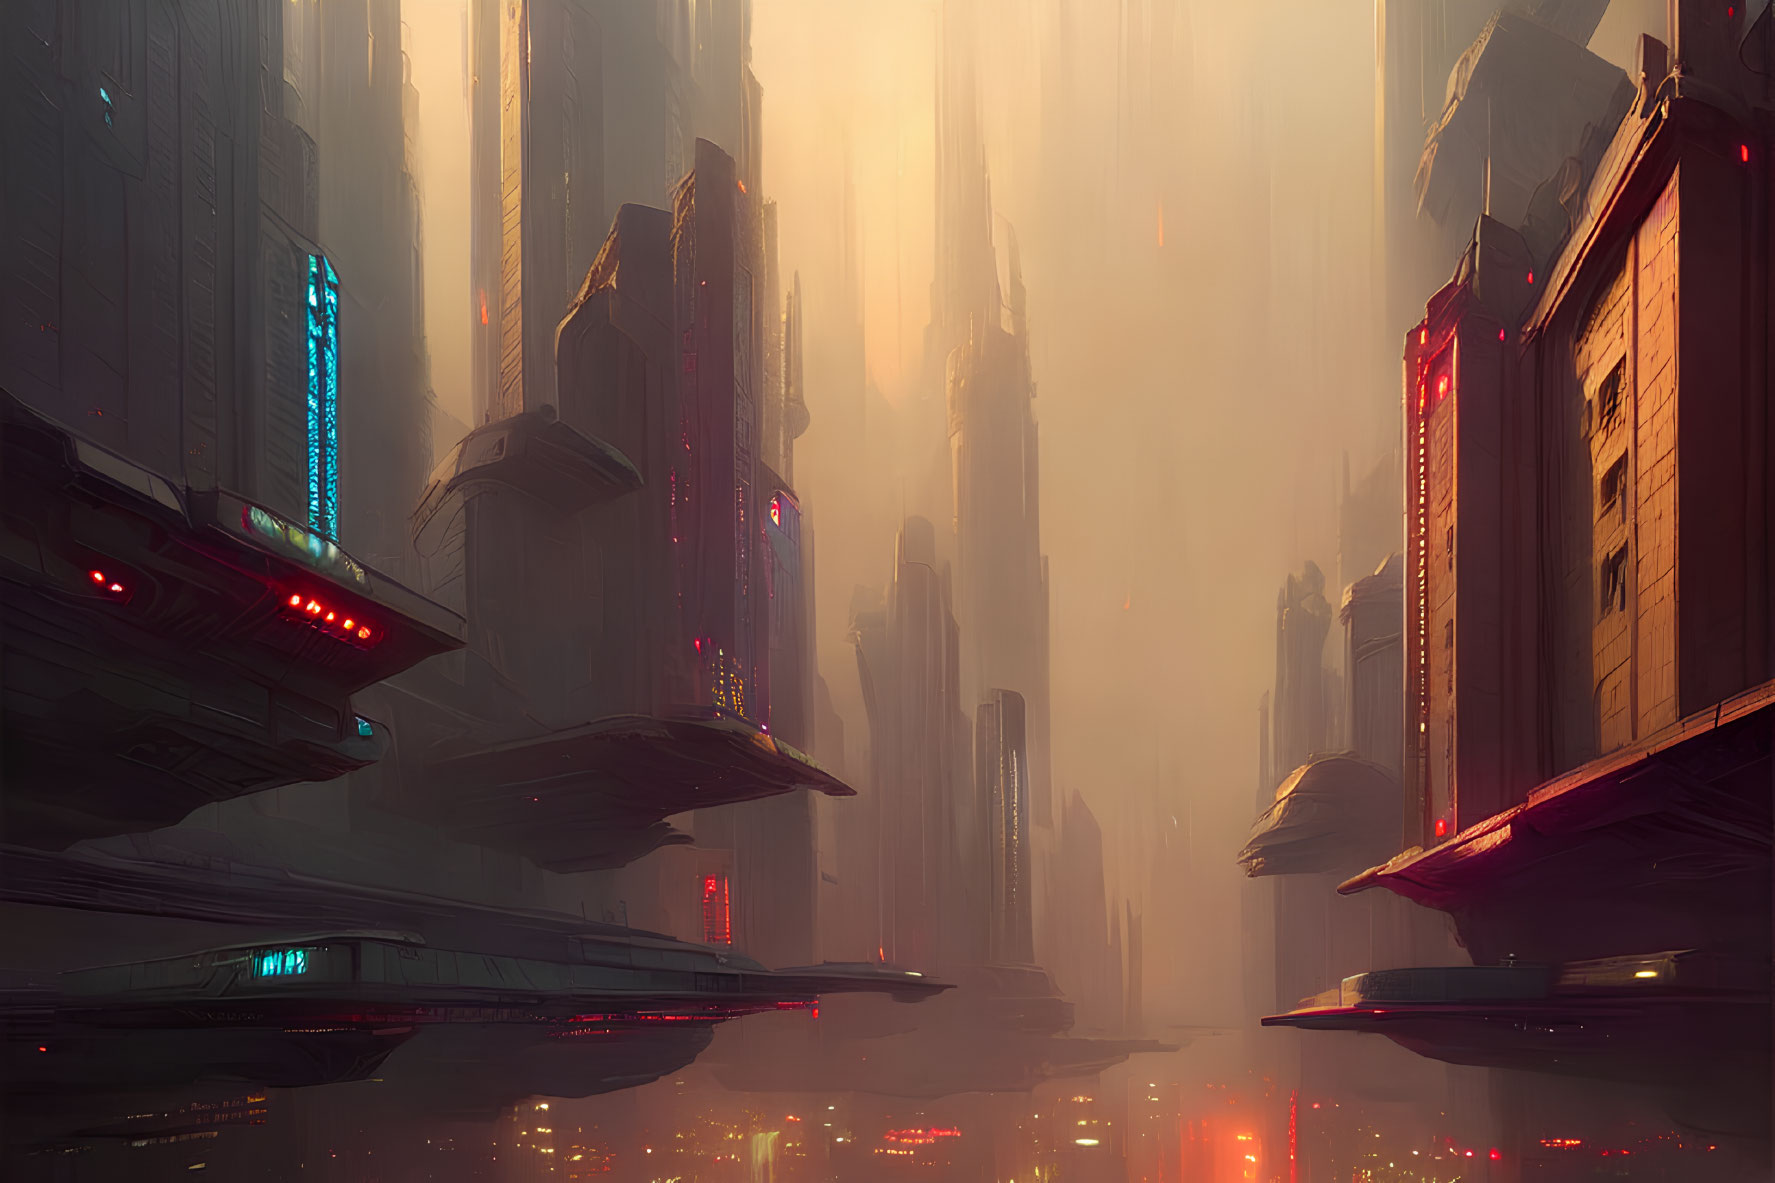 Futuristic cityscape with towering skyscrapers and flying vehicles illuminated by neon lights